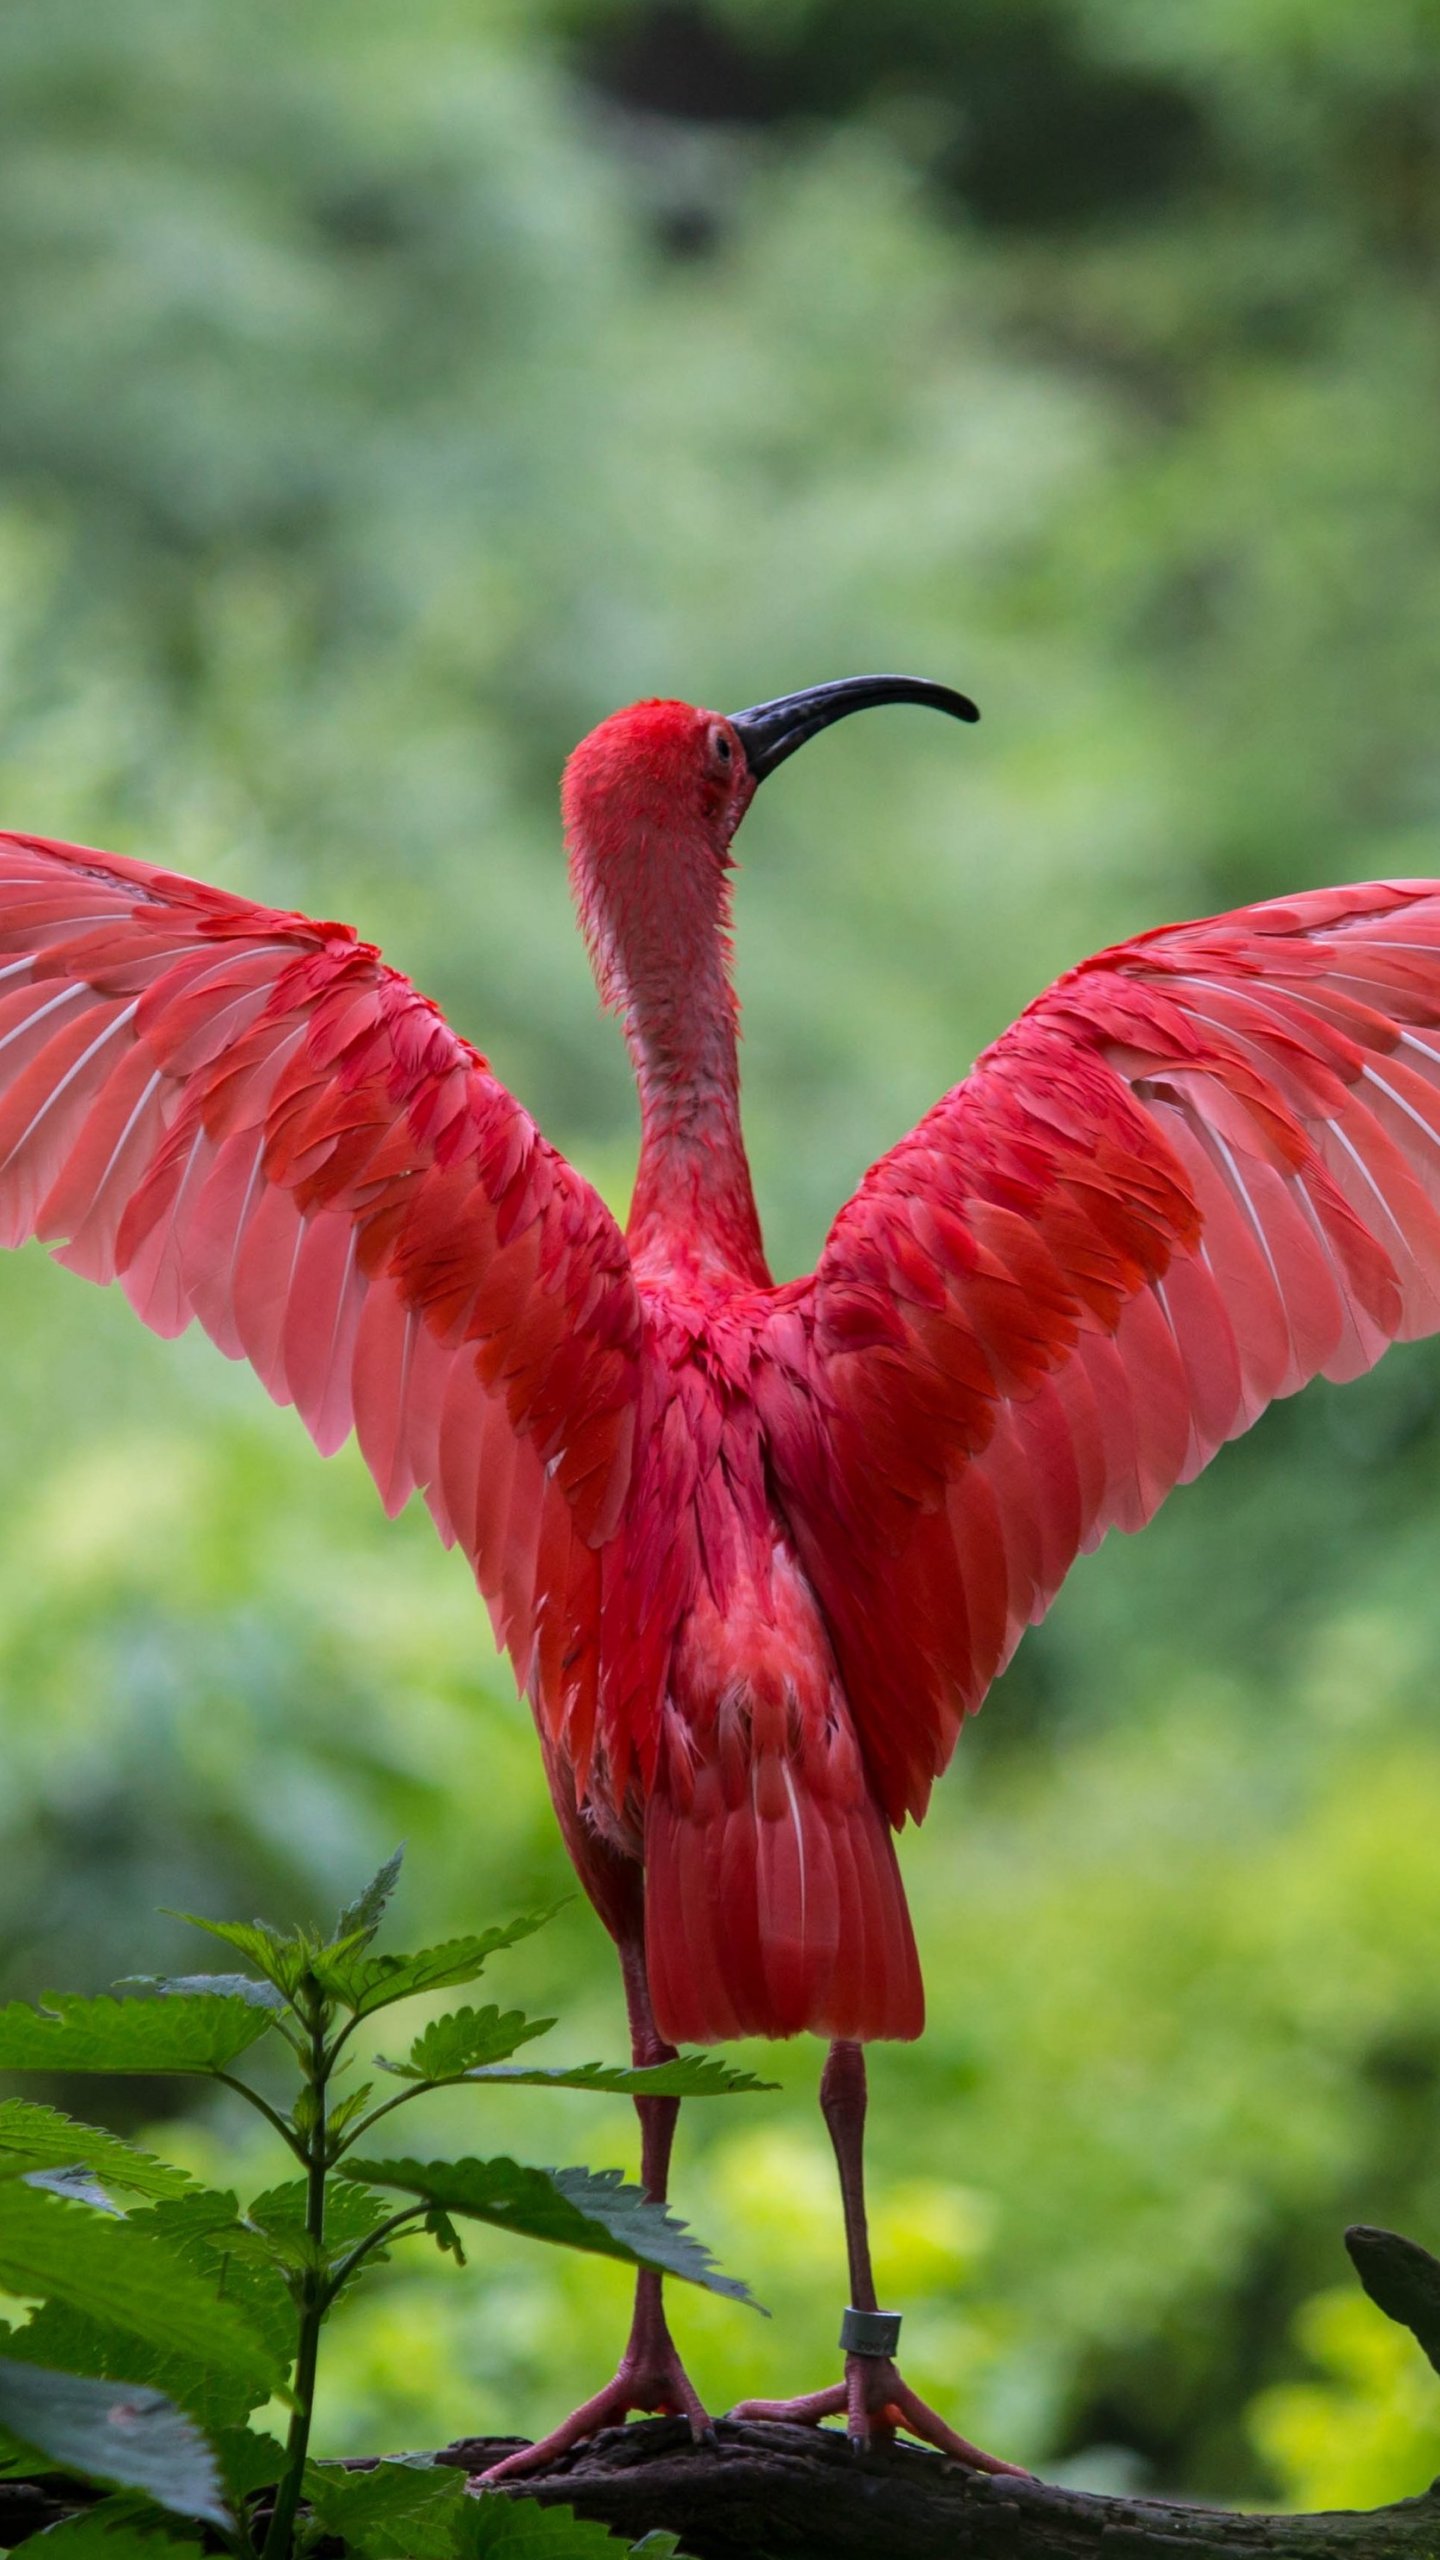 Scarlet Ibis Spreading Its Wings Wallpaper, Android & Desktop Background